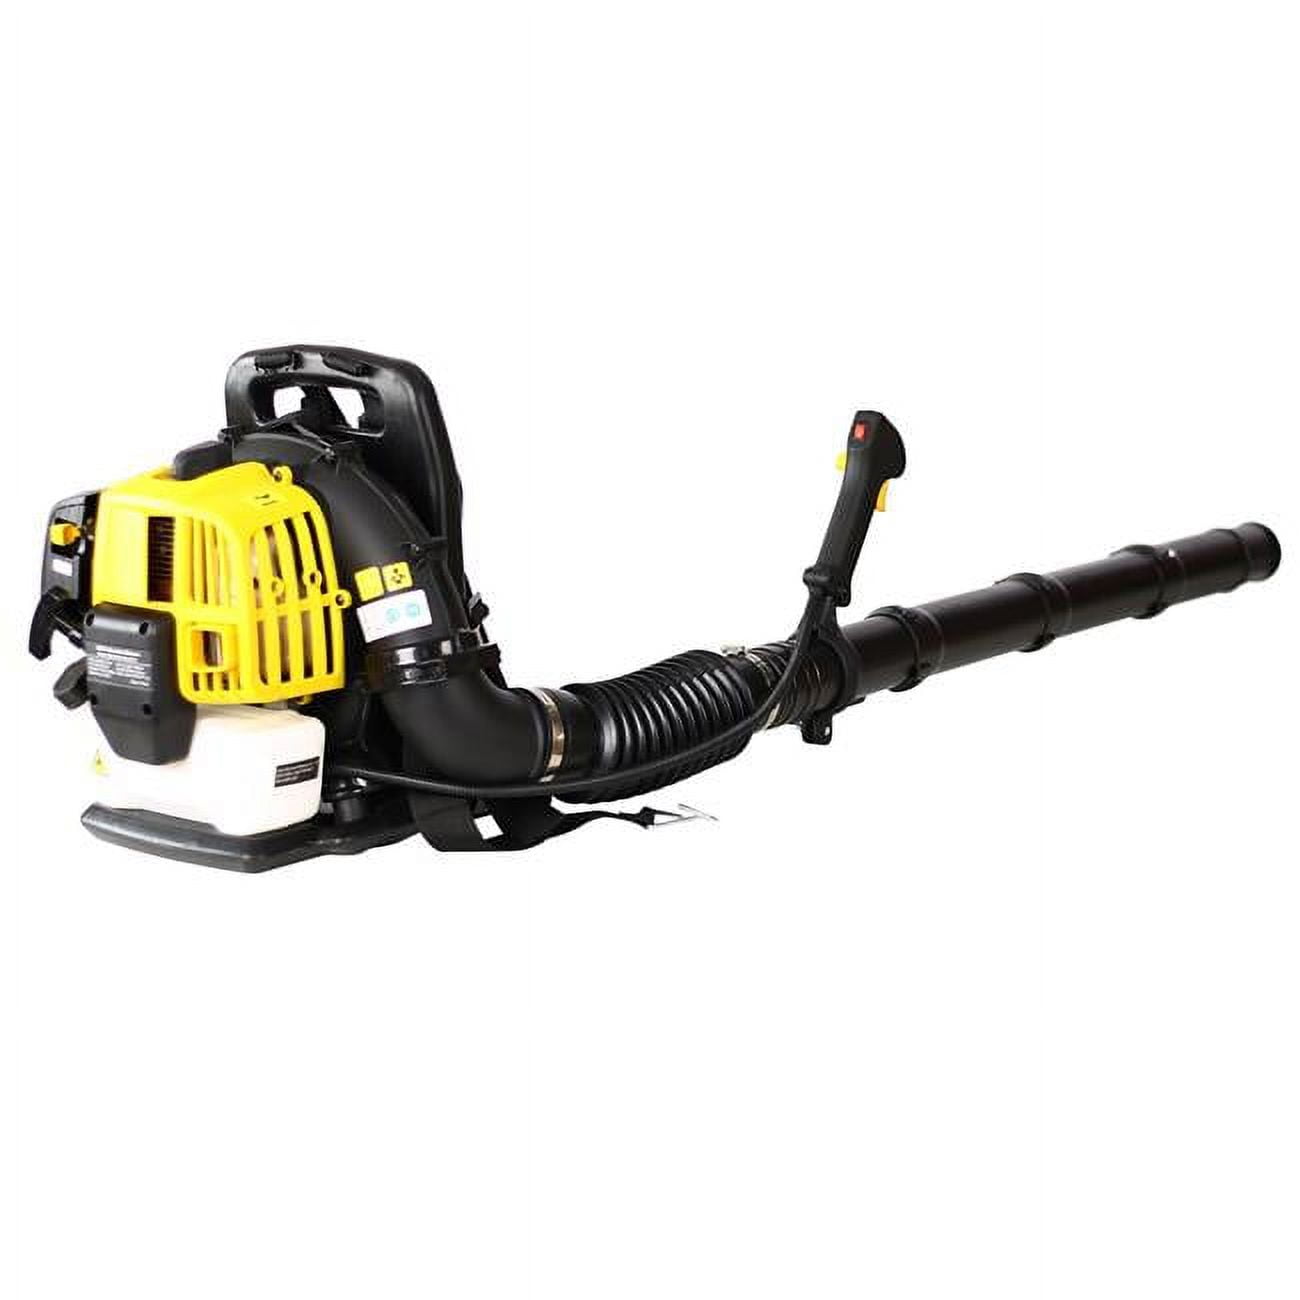 Picture of Direct Wicker UBS-W46537643 52cc 2-Cycle Engine Backpack Blower, Gas Leaf Blower with Extention Tube for Blowing Leaves and Dust (Yellow)